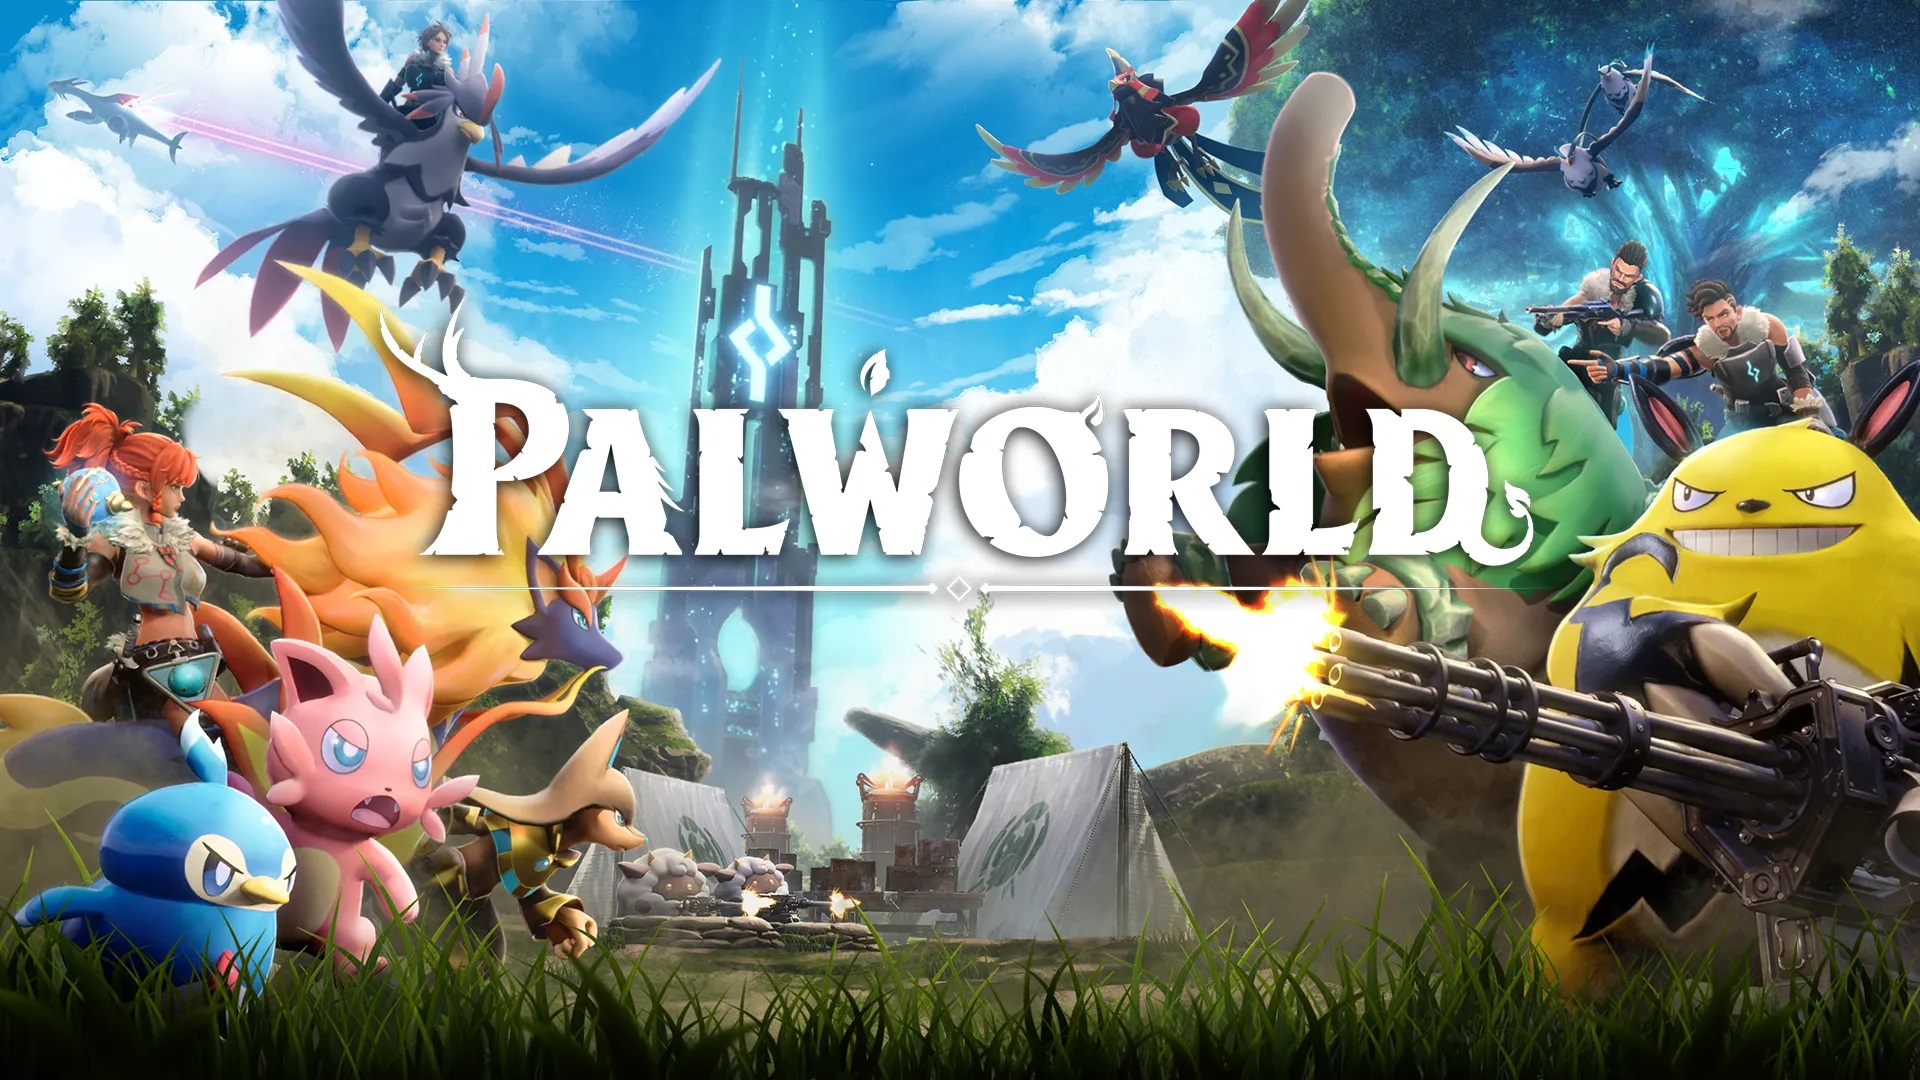 They Don't Mention Palworld Directly, But The Pokémon Company Will "Investigate"